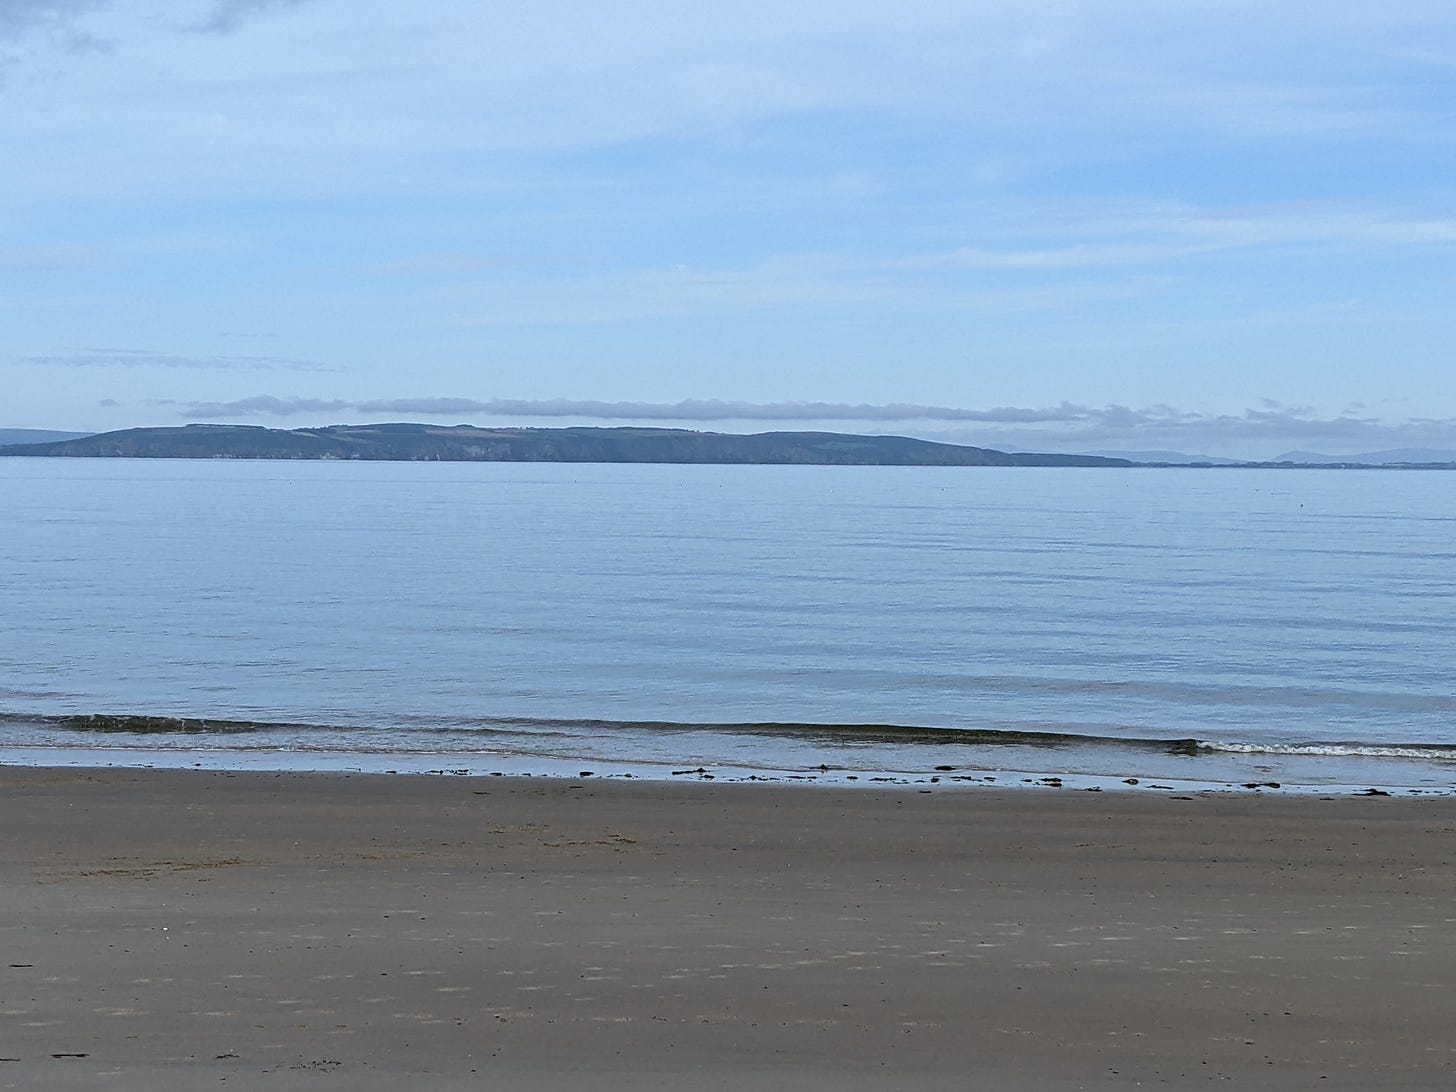 Beach with a calm flat blue sea at Nairn stretching out to the Black isle hills beyond